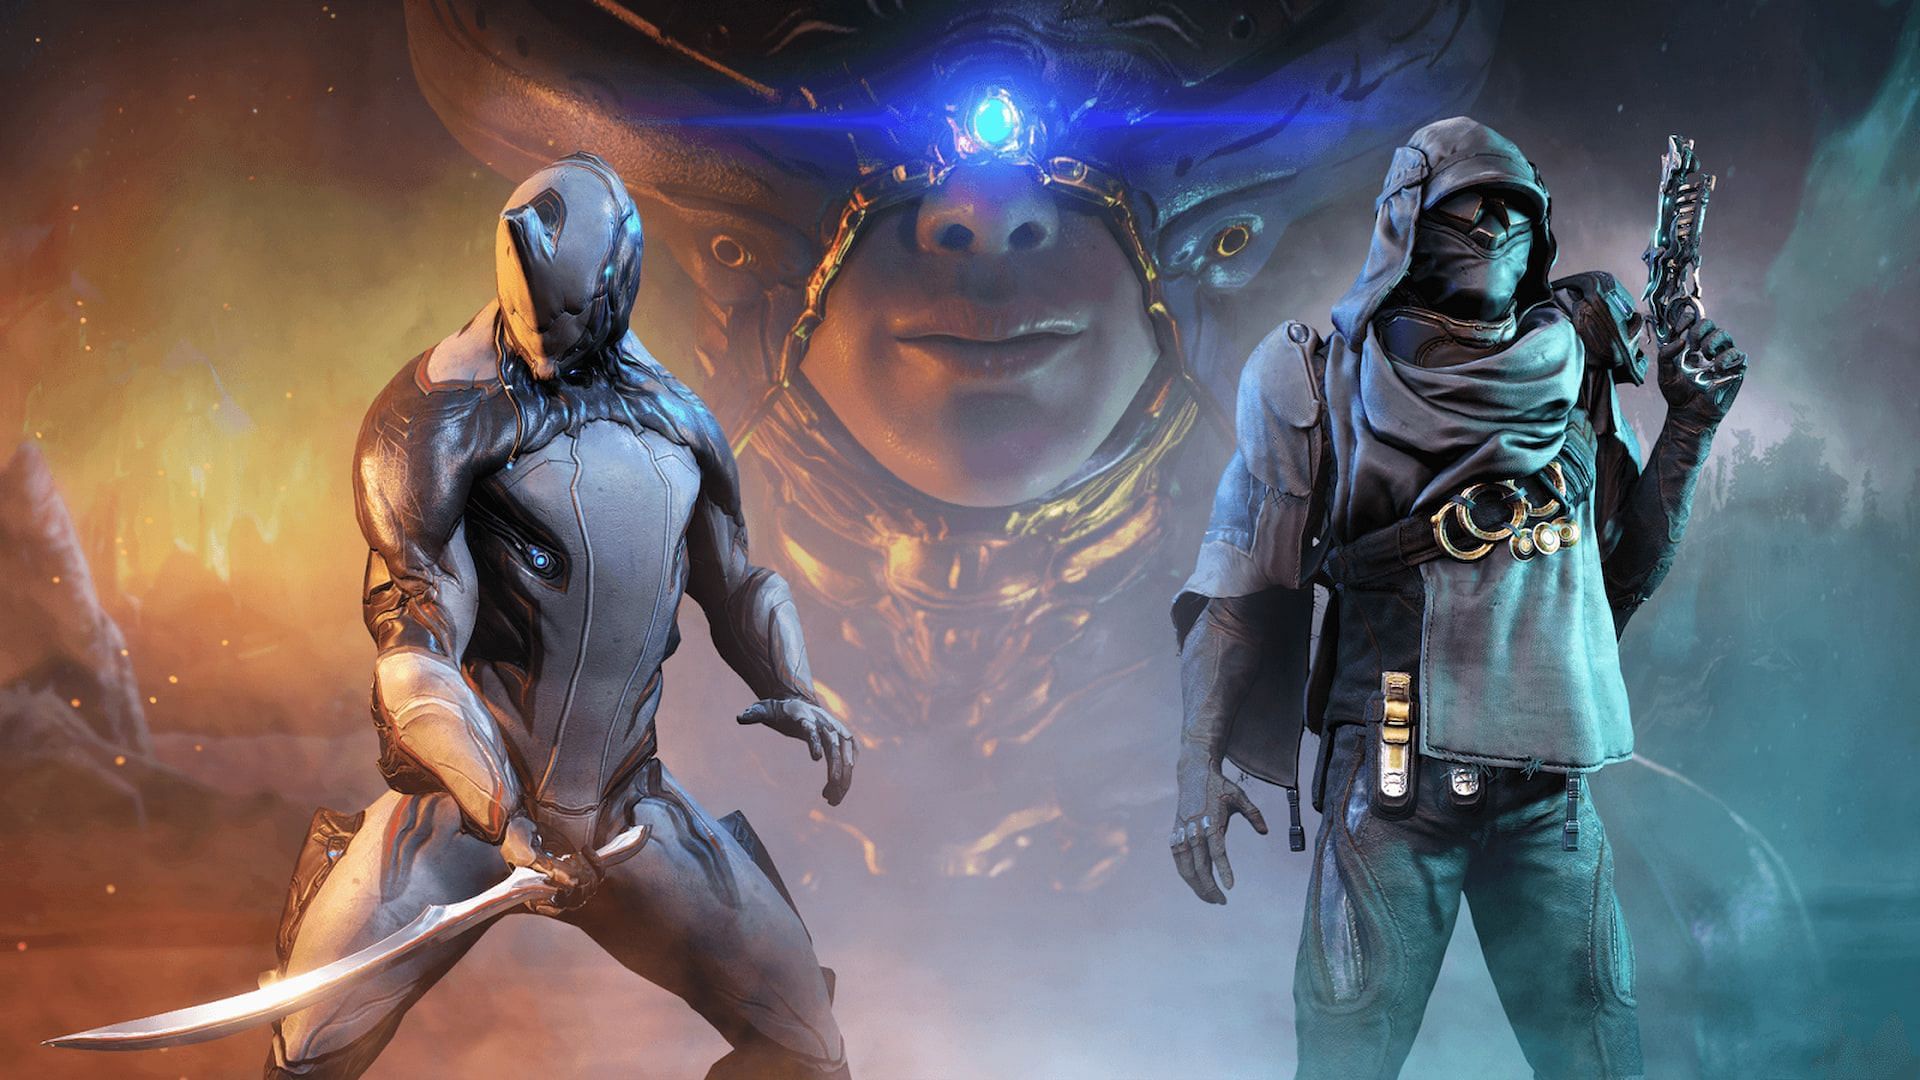 New players in Warframe can now choose between two starter quests (image via Digital Extremes)